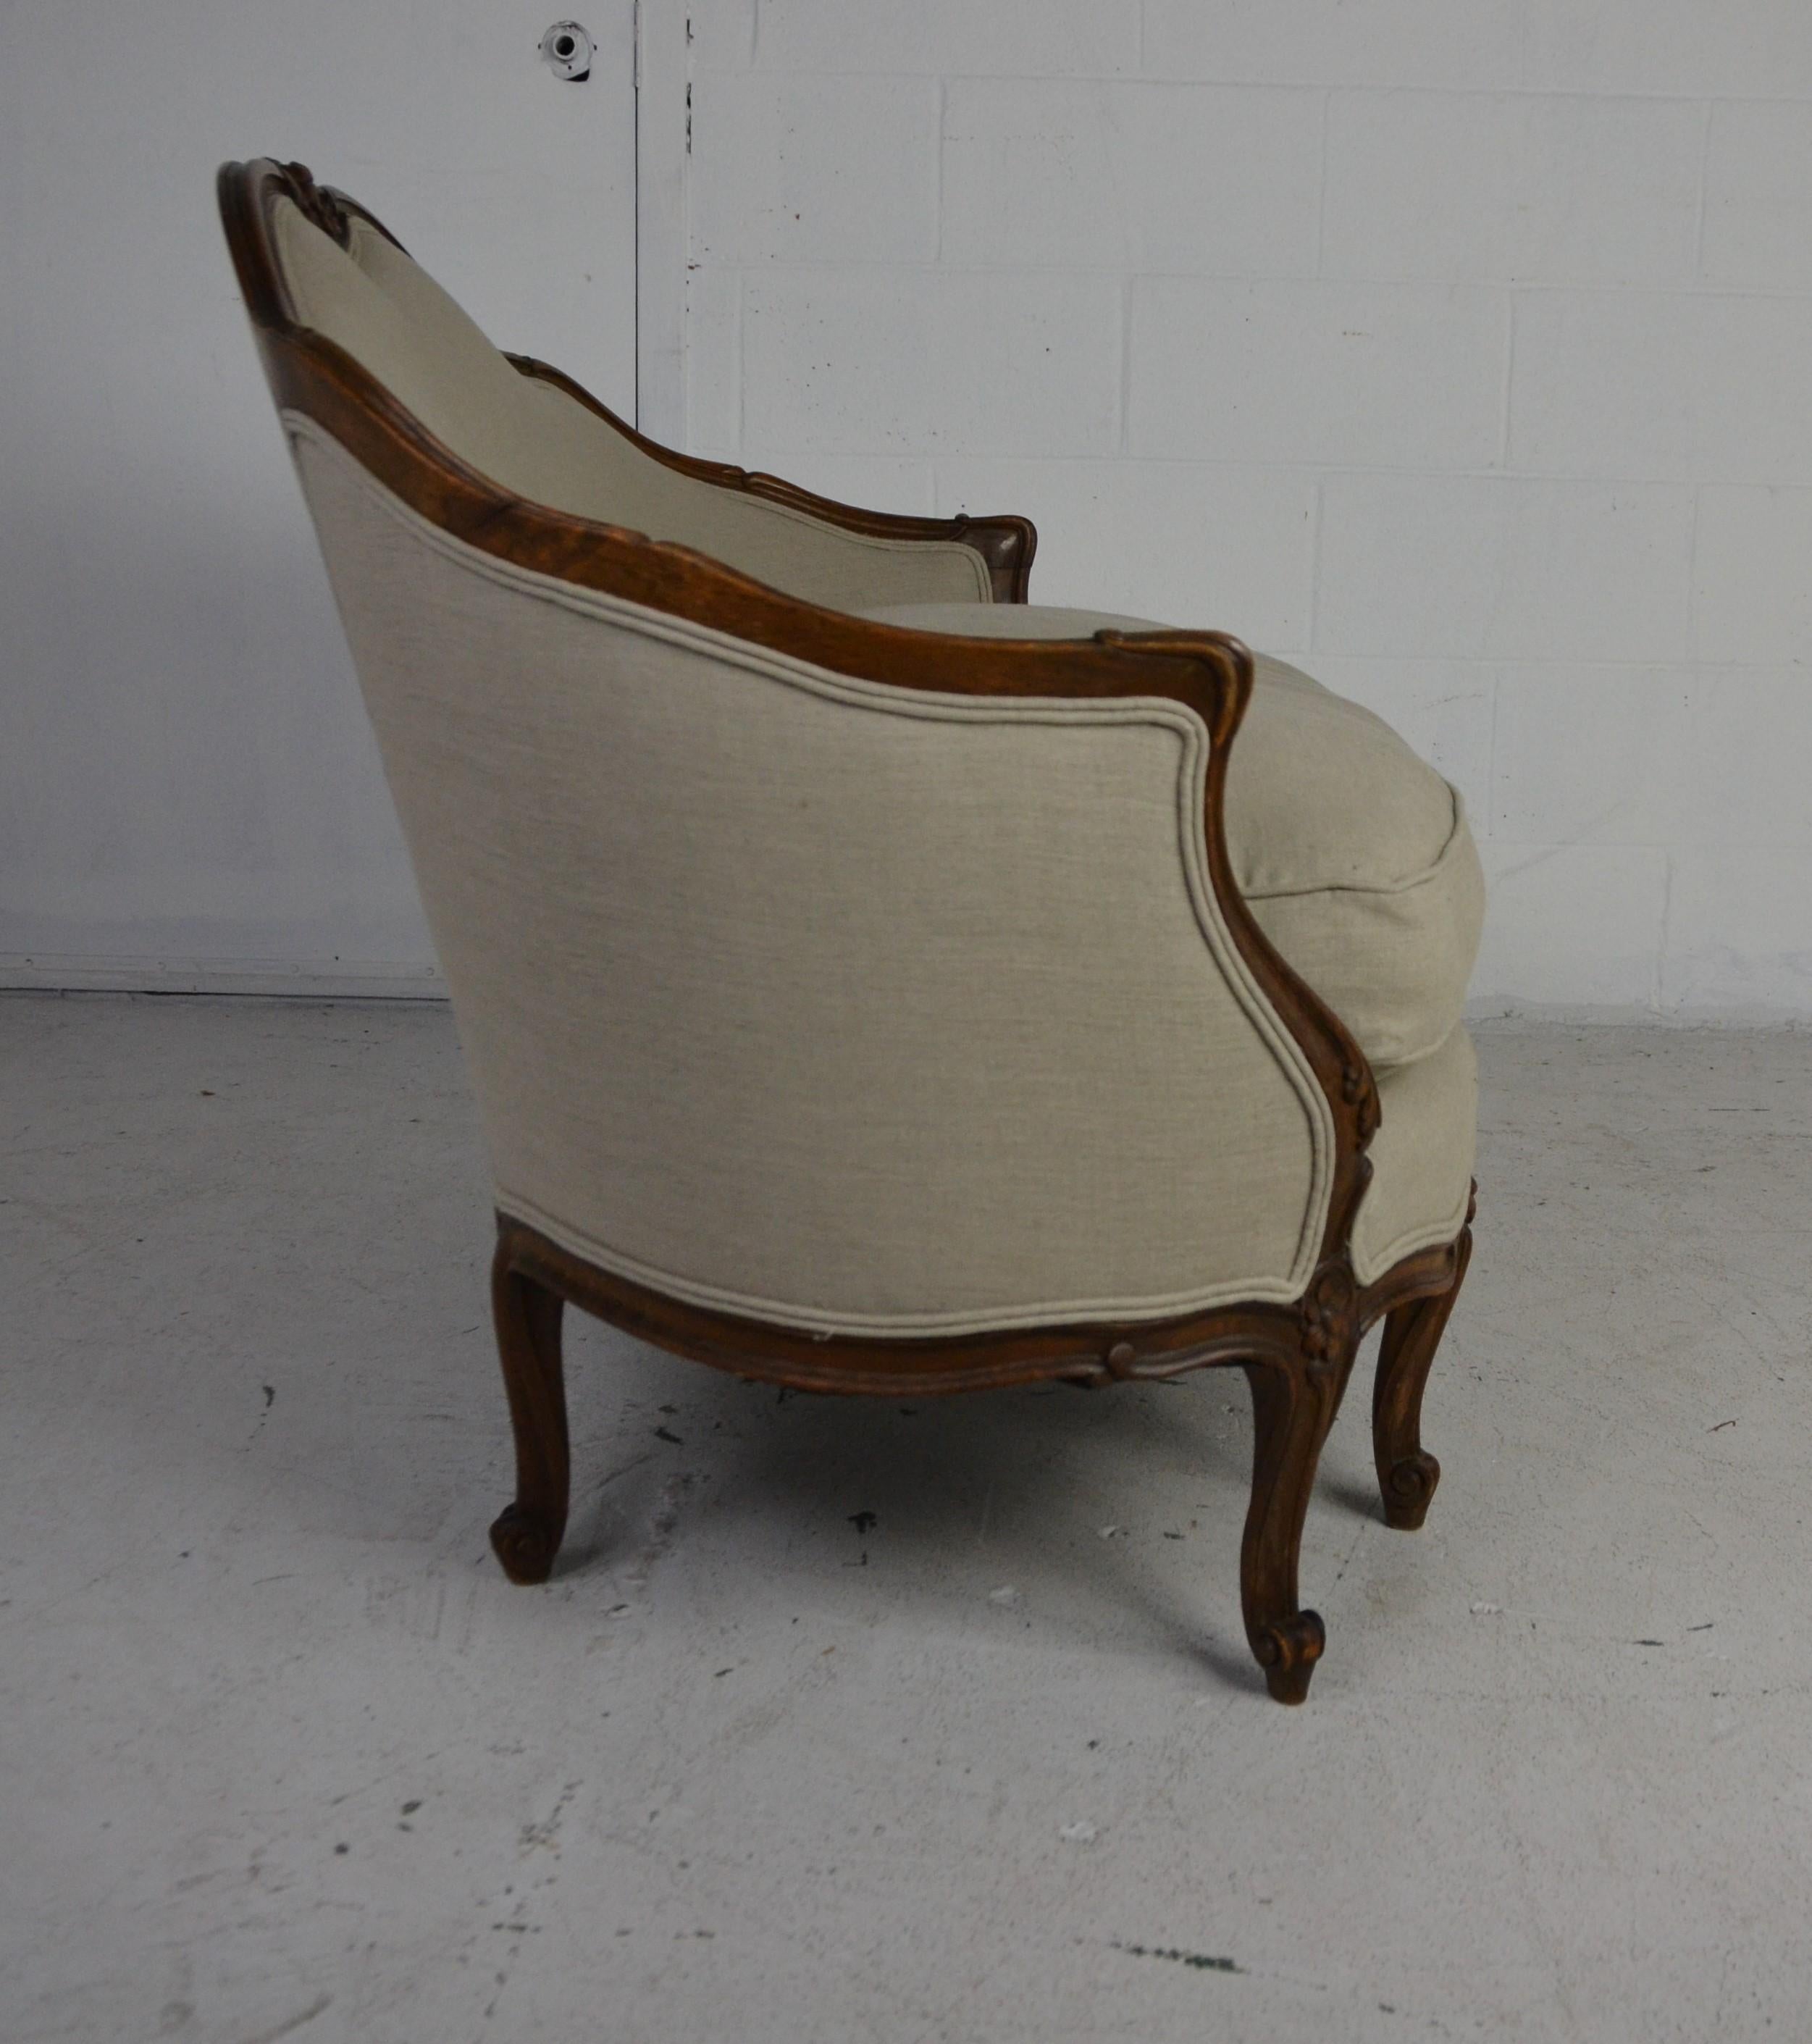 Louis XV style French settee. Upholstered in linen.